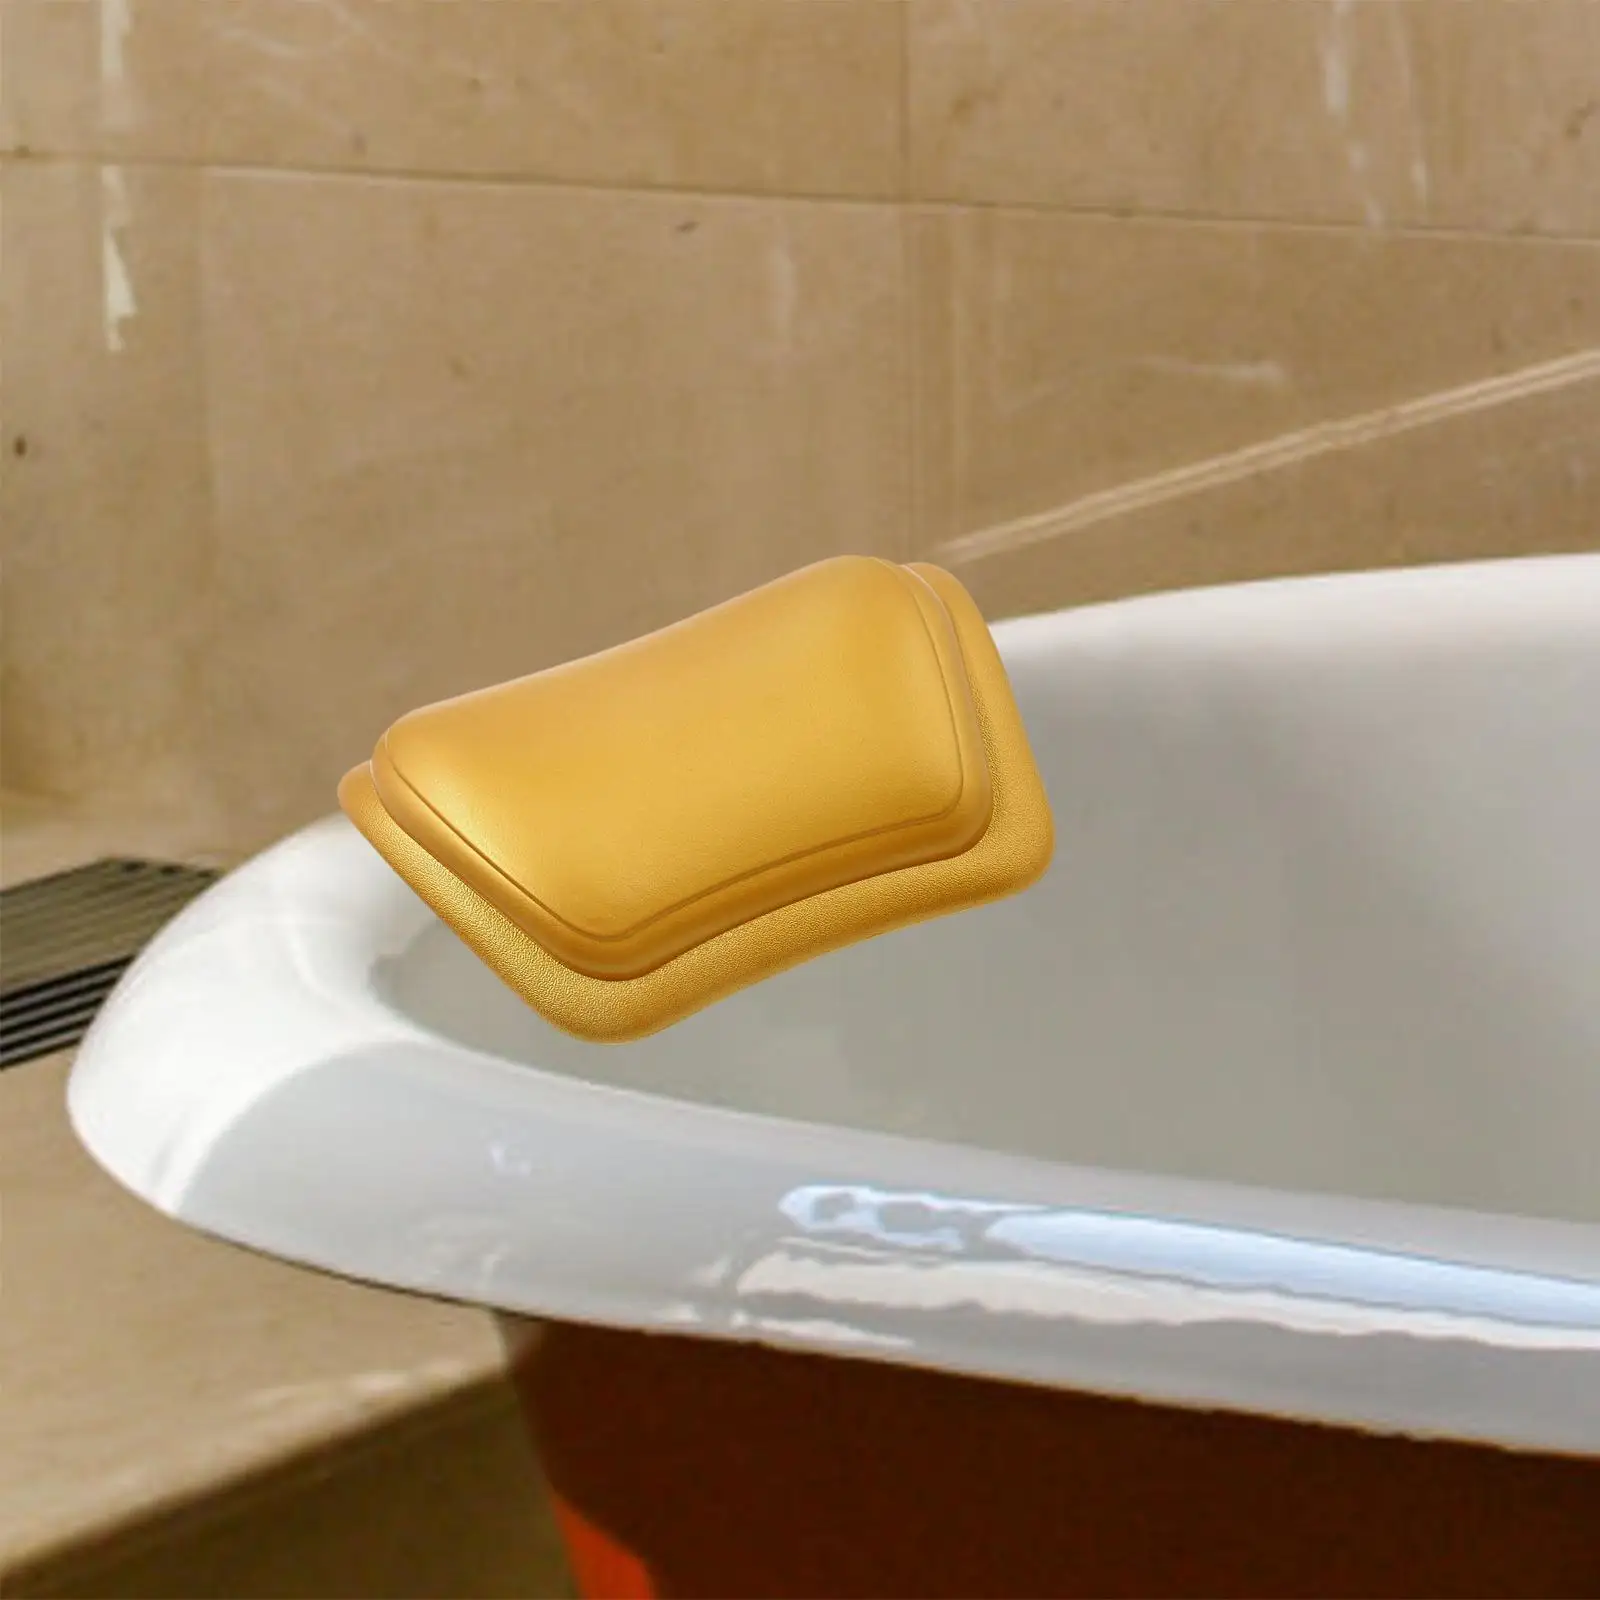 Bathtub Pillow Strong Suction Waterproof Support Cushion Headrest for Home